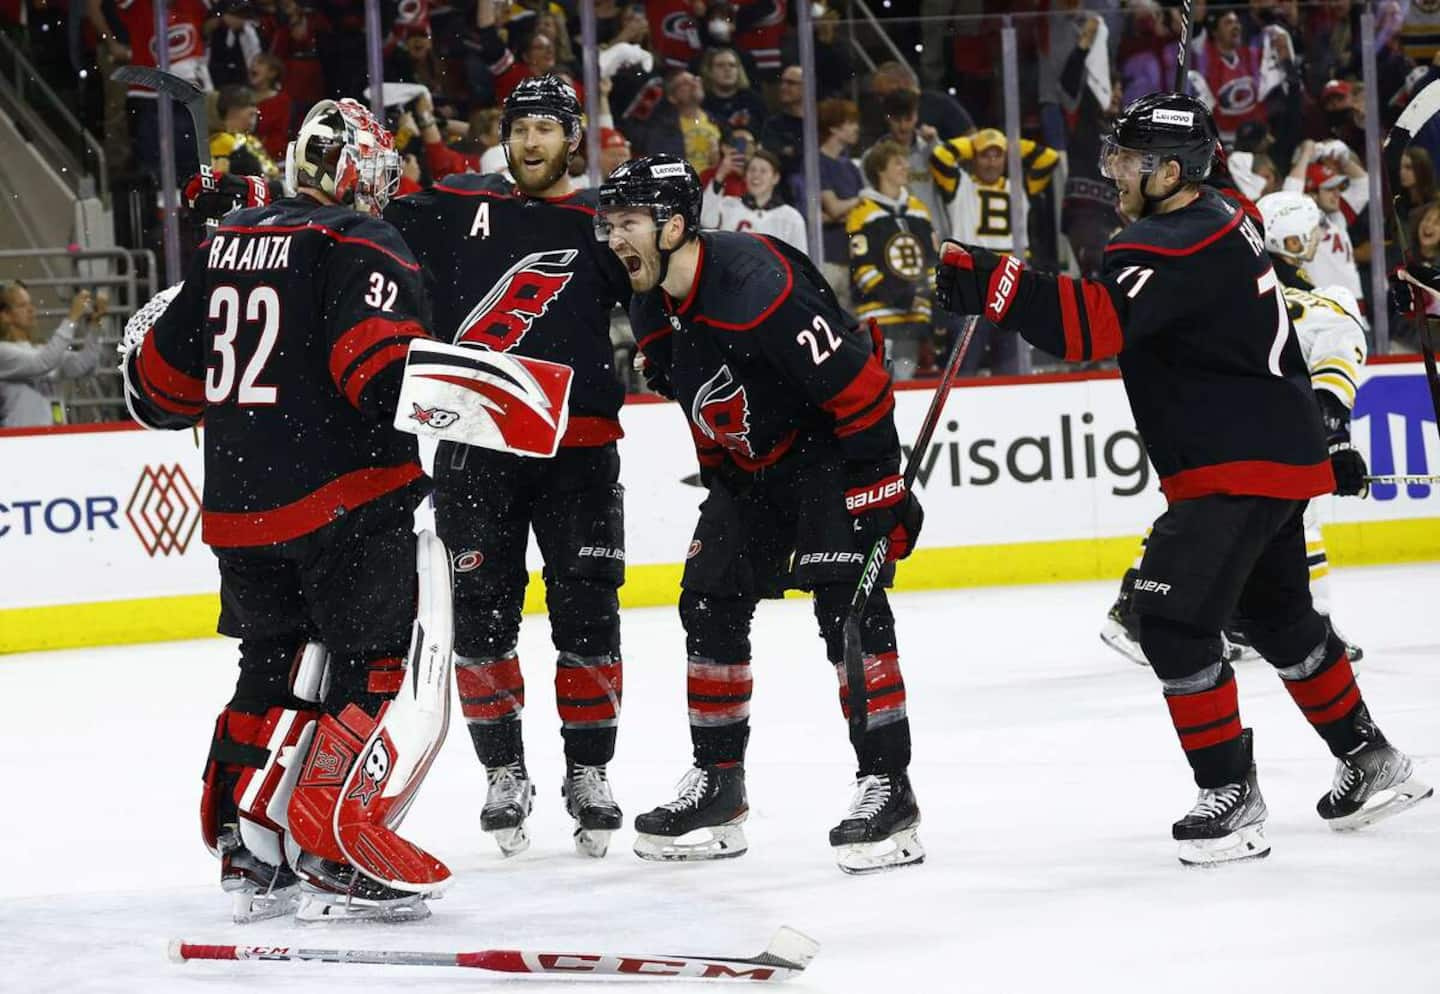 6-5 win: the Hurricanes got hot against the Flyers